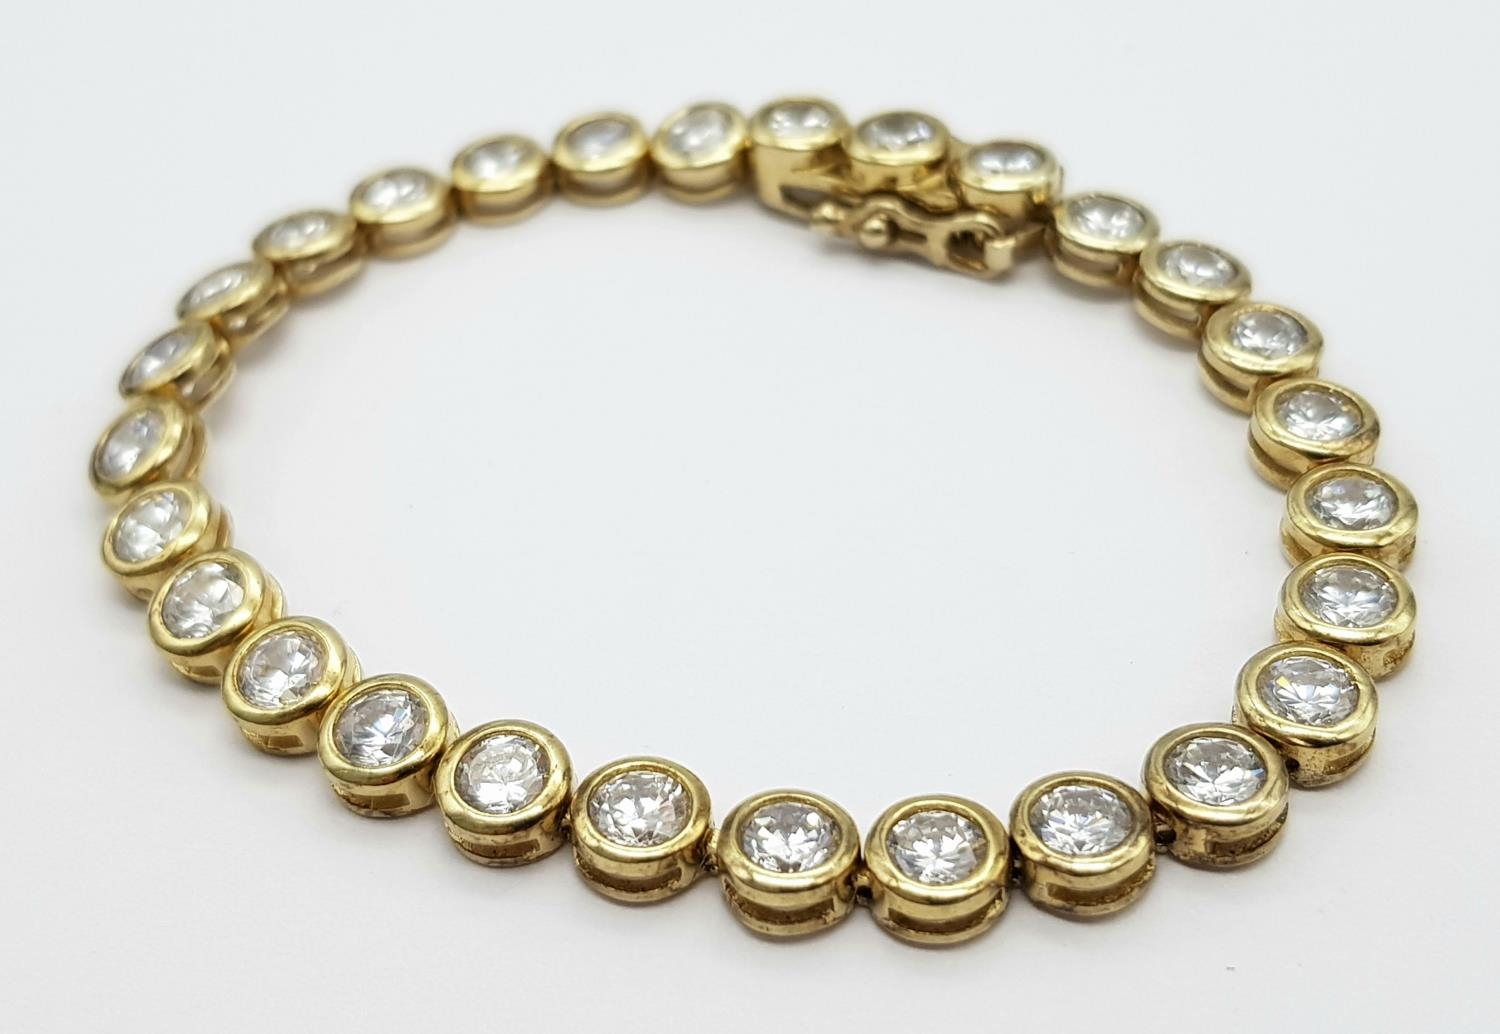 A Gilded 925 Silver Cubic Zirconia Bracelet. 18.5cm length, 16.4g total weight. - Image 2 of 5